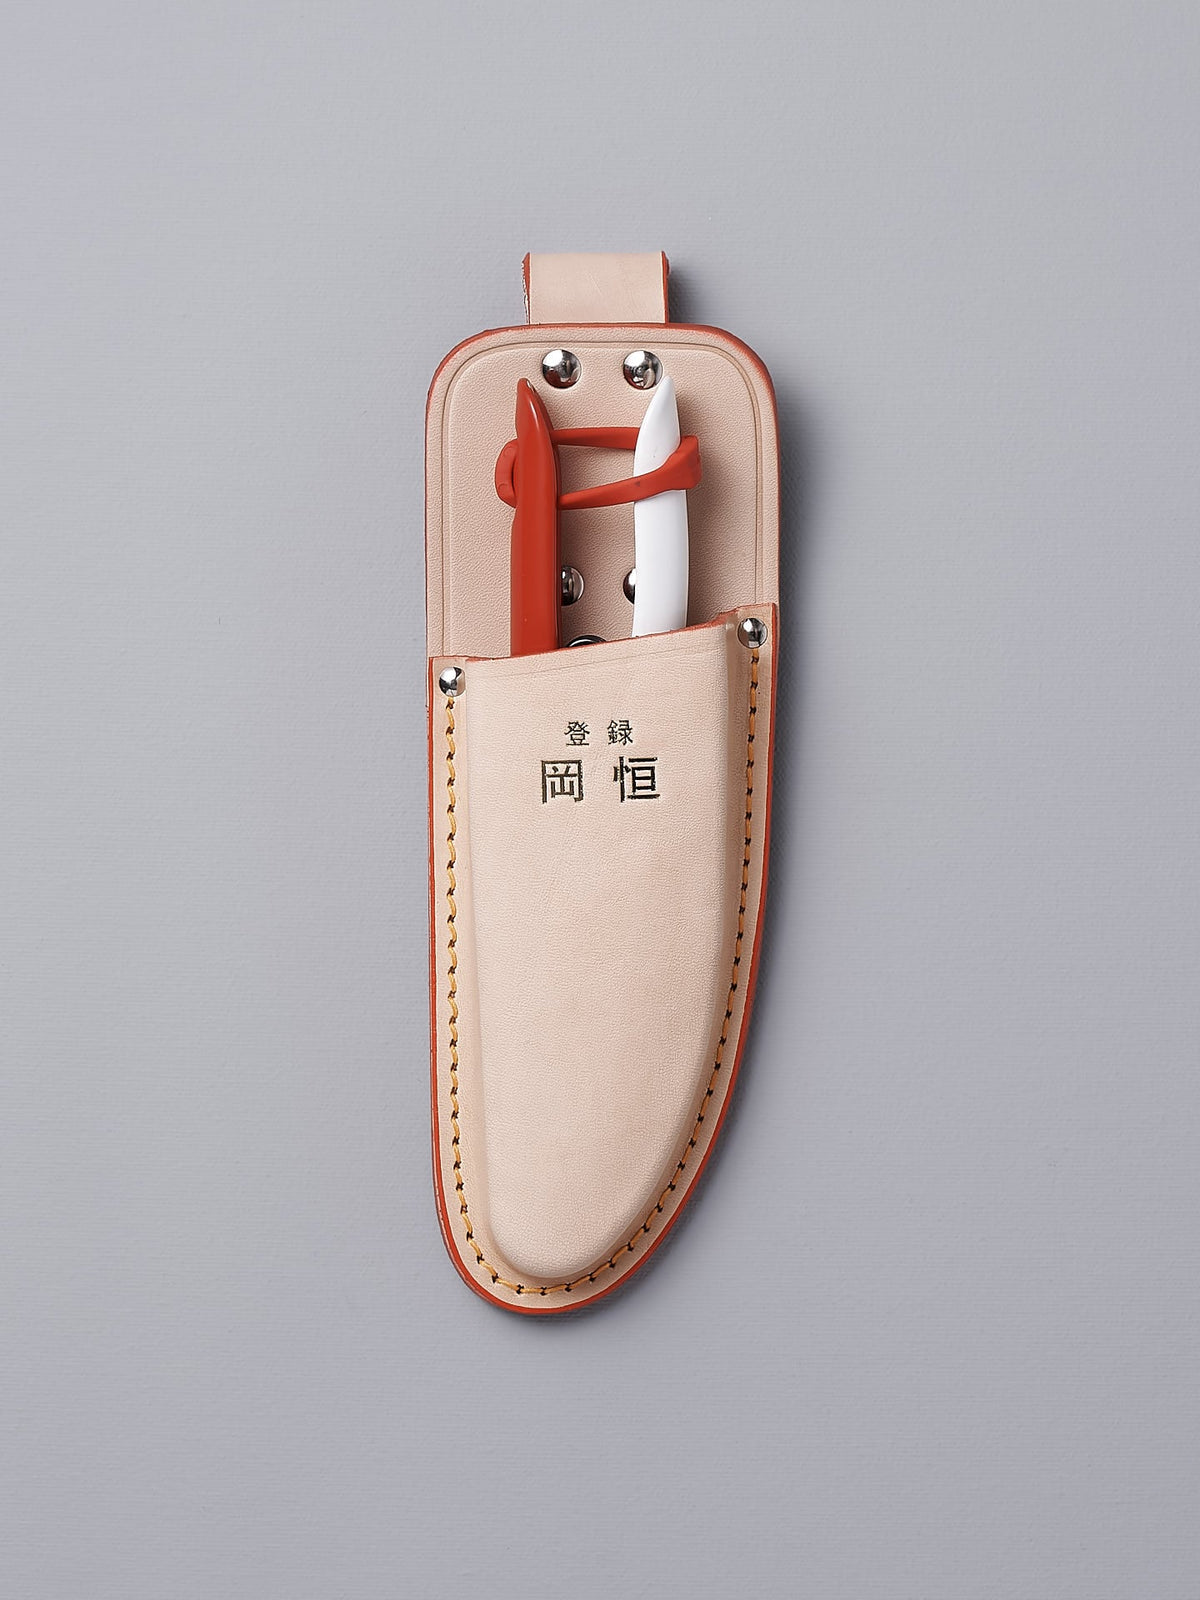 An Okatsune Single Leather Holster with a pair of Okatsune scissors and a pair of Okatsune scissors.